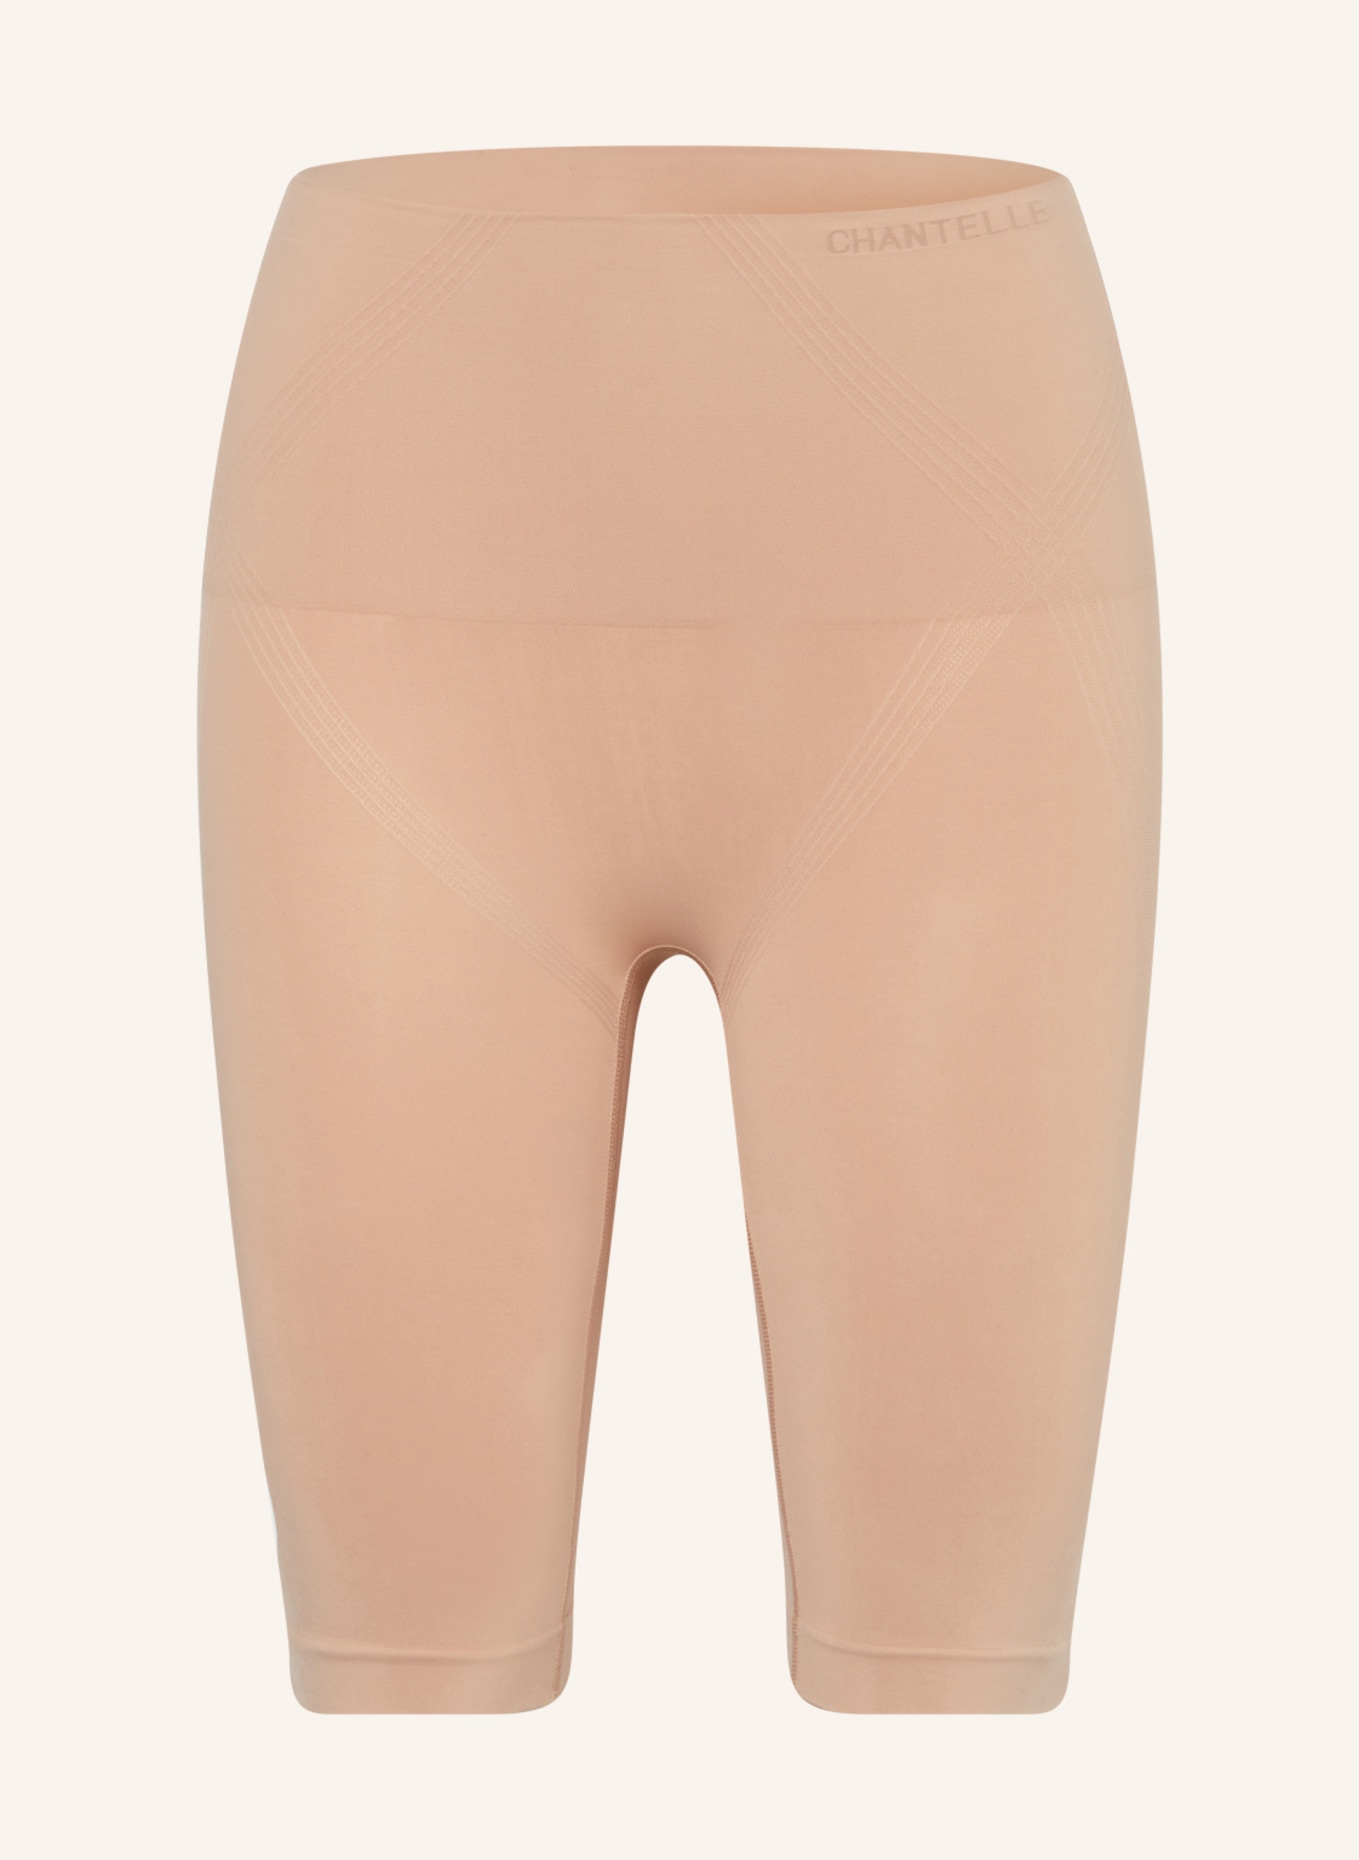 CHANTELLE Shaping shorts BASIC SHAPING in nude